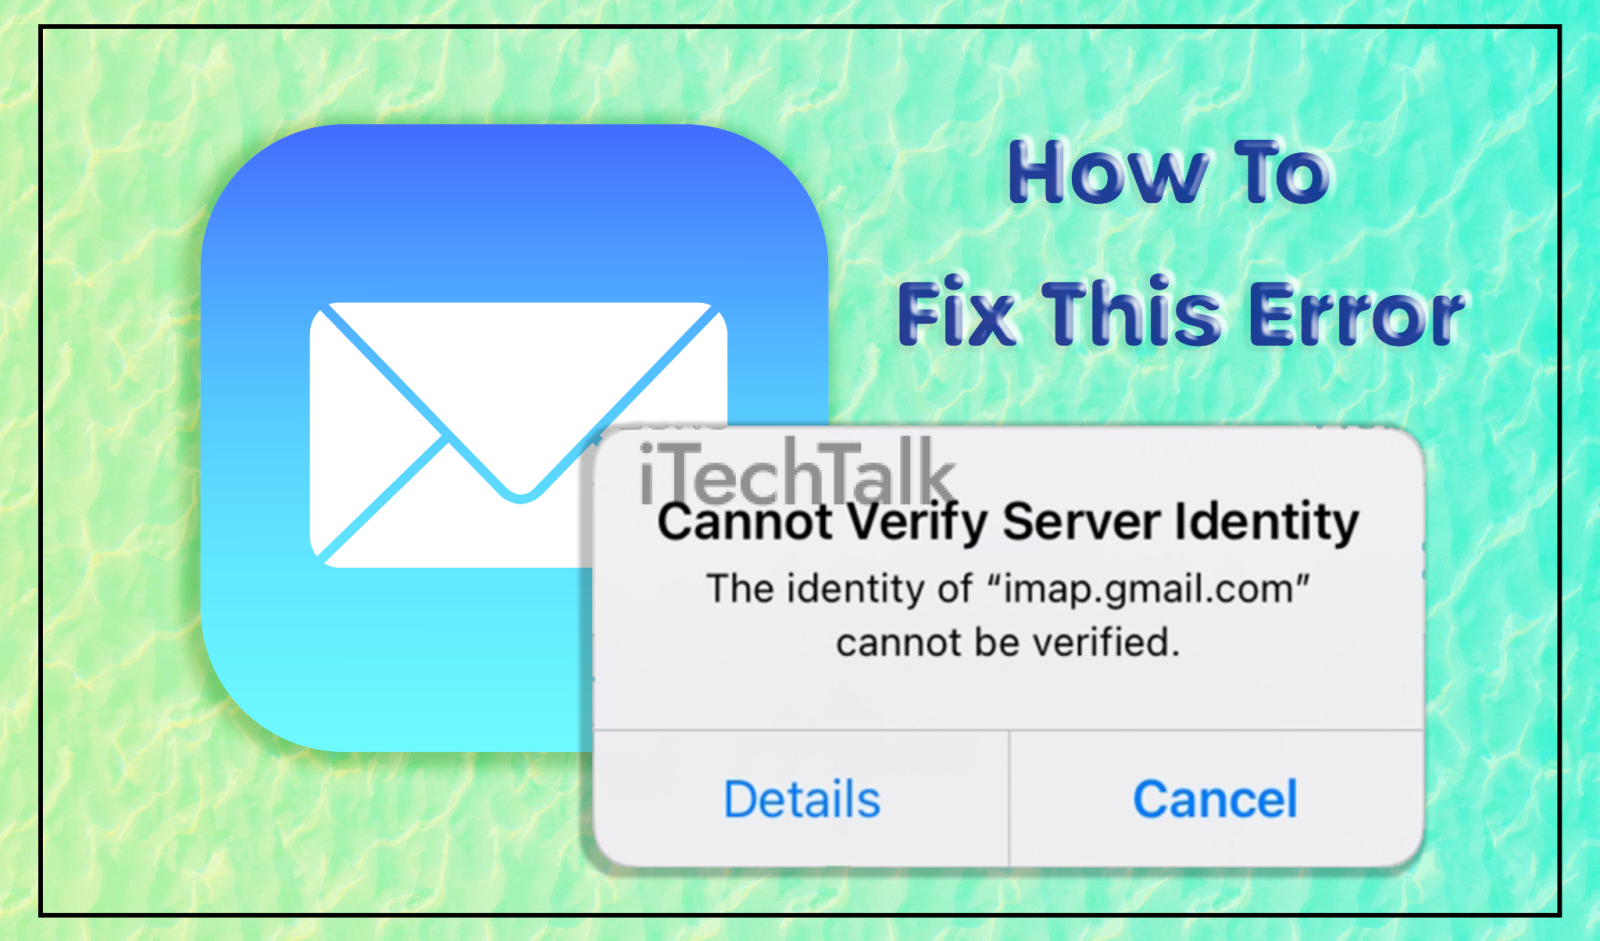 How To Fix The "Cannot Verify Server Identity On Imap.gmail" Error On